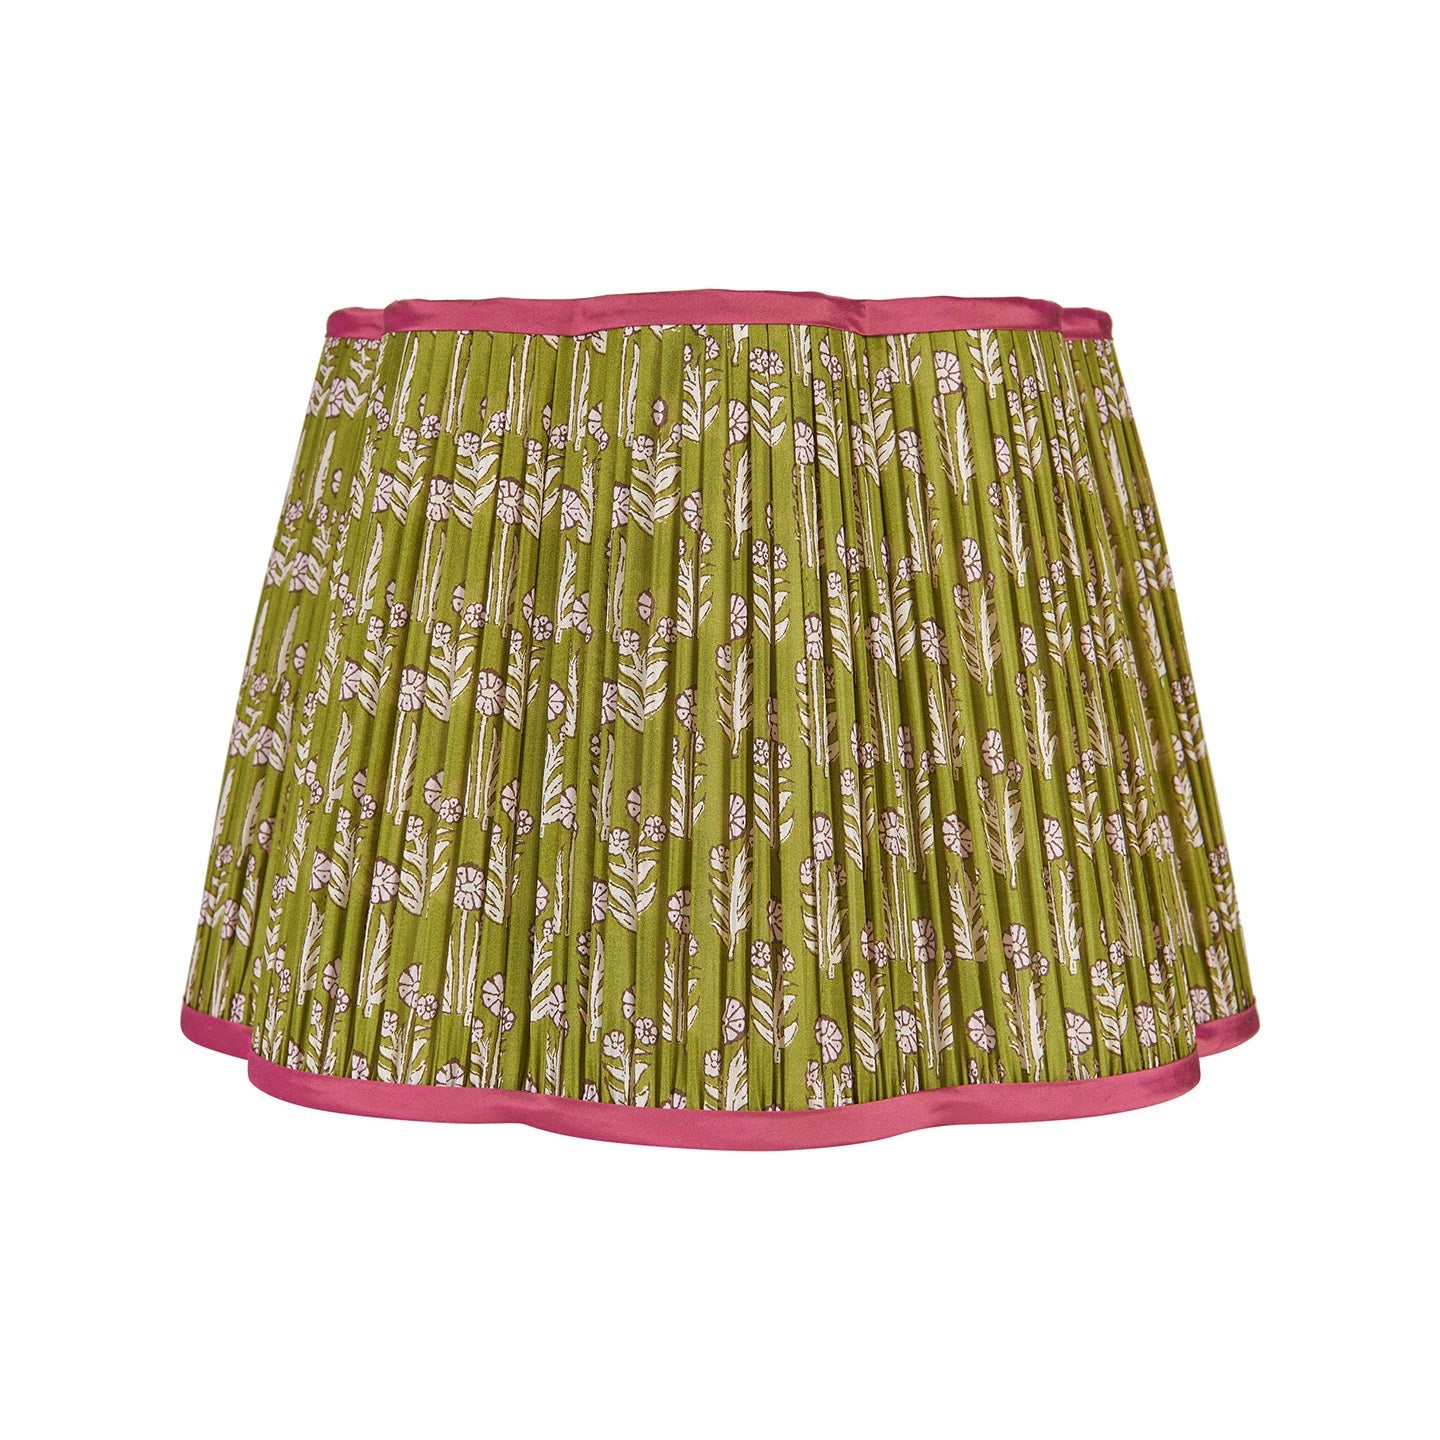 Pink on Green Marigold Pleated Silk Scalloped Lampshade with Pink Trim